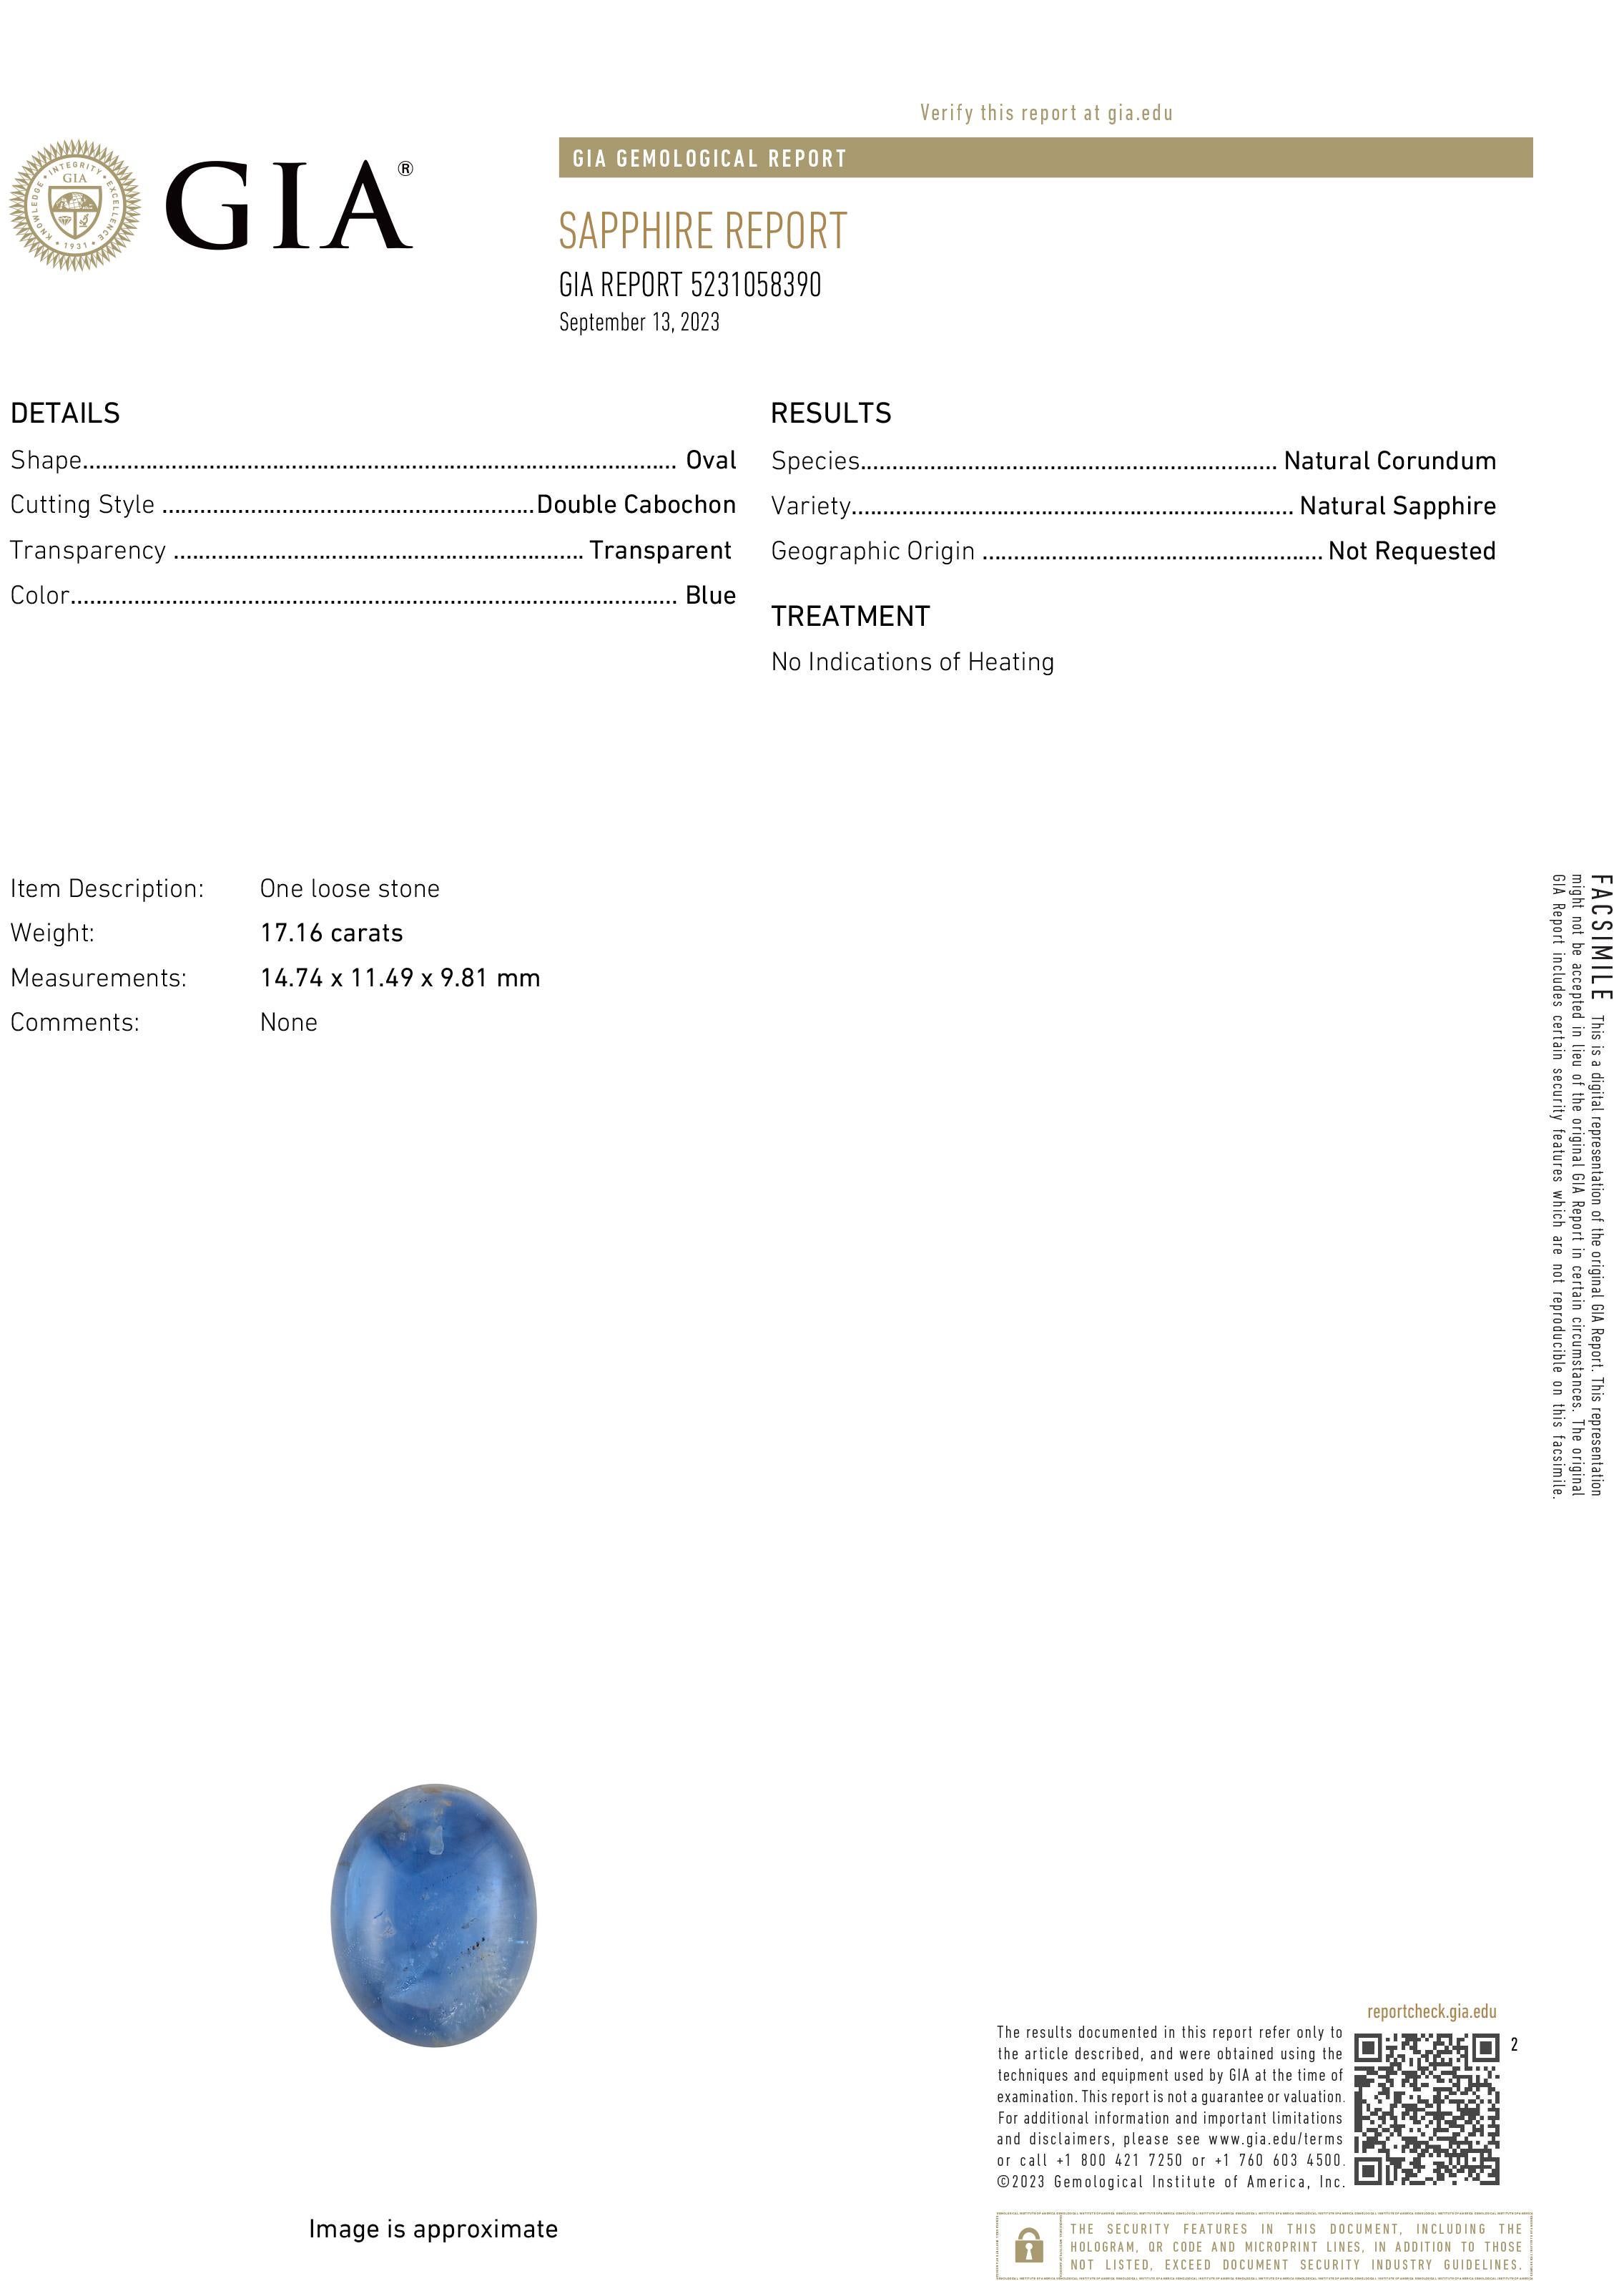 Introducing a Magnificent GIA Certified No Heat Ceylon Cabochon Sapphire
Dazzle and amaze with this exquisite GIA Certified #5231058390 No Heat Ceylon Cabochon Sapphire, a true gem of exceptional beauty and rarity. Weighing an impressive 17.16